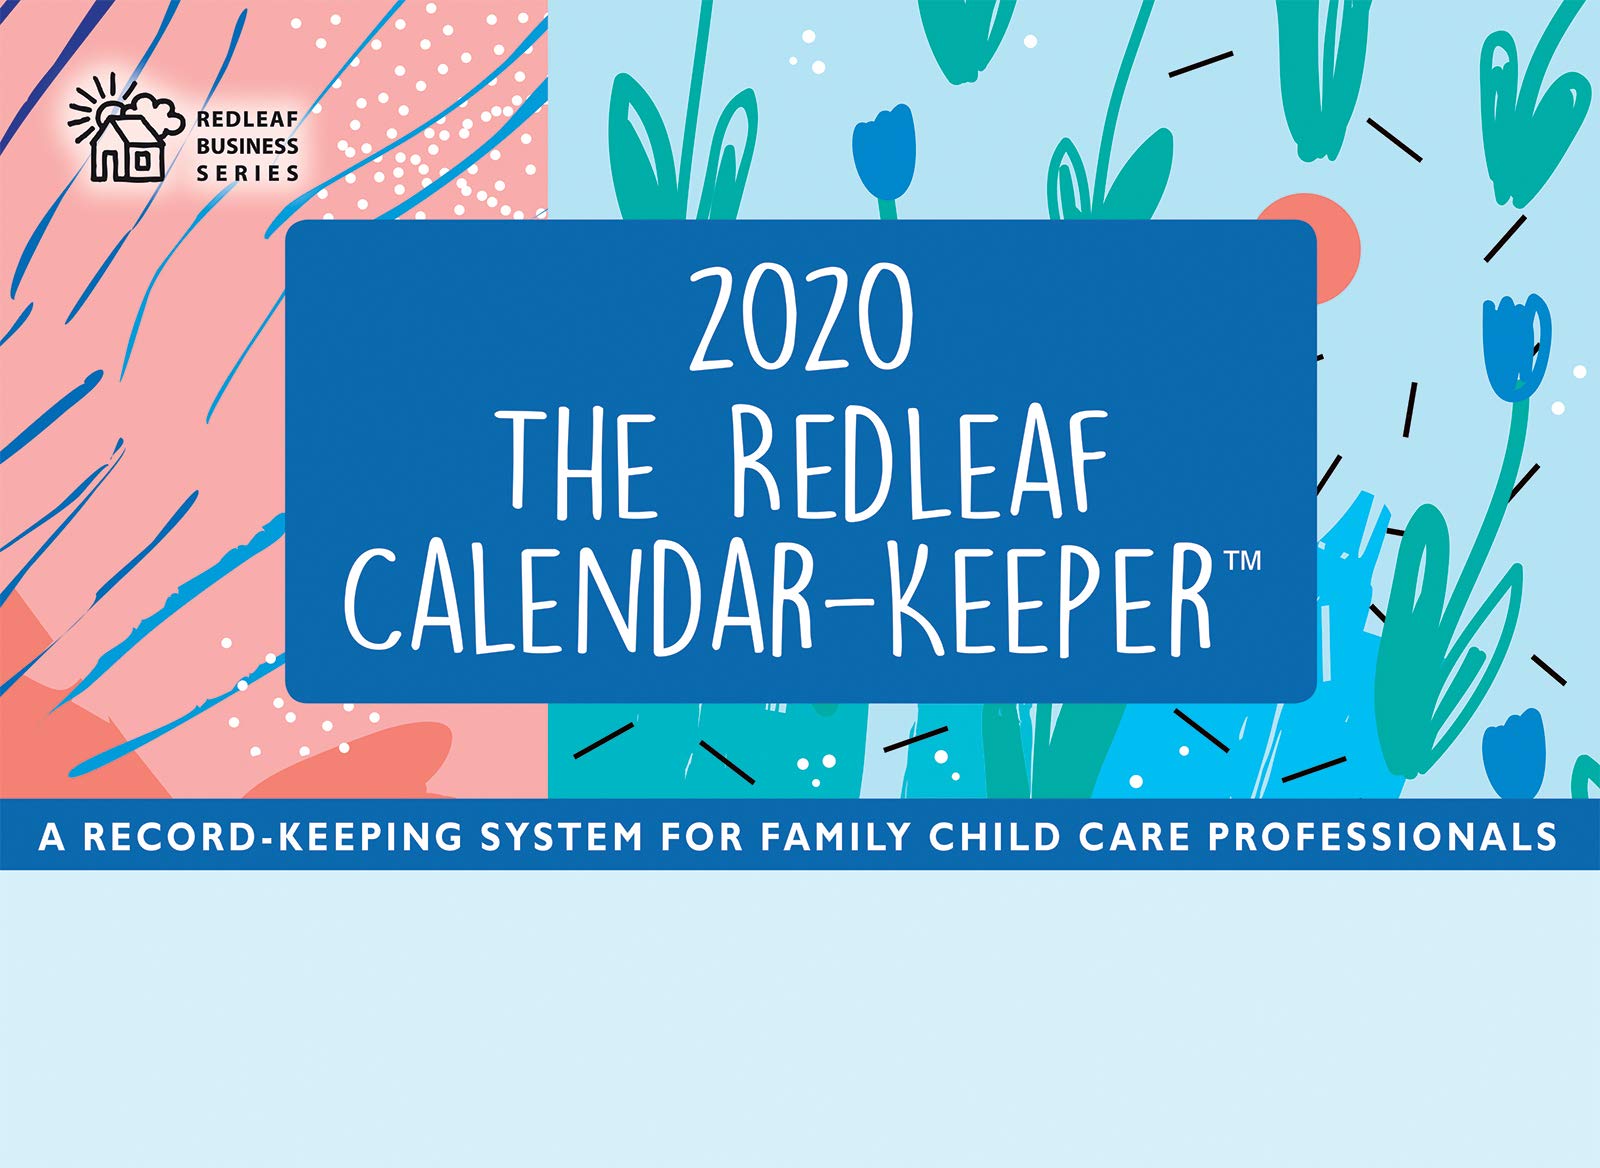 Redleaf Calendar-Keeper 2020: A Record-Keeping System for Family Child Care Professionals (Redleaf Business Series)